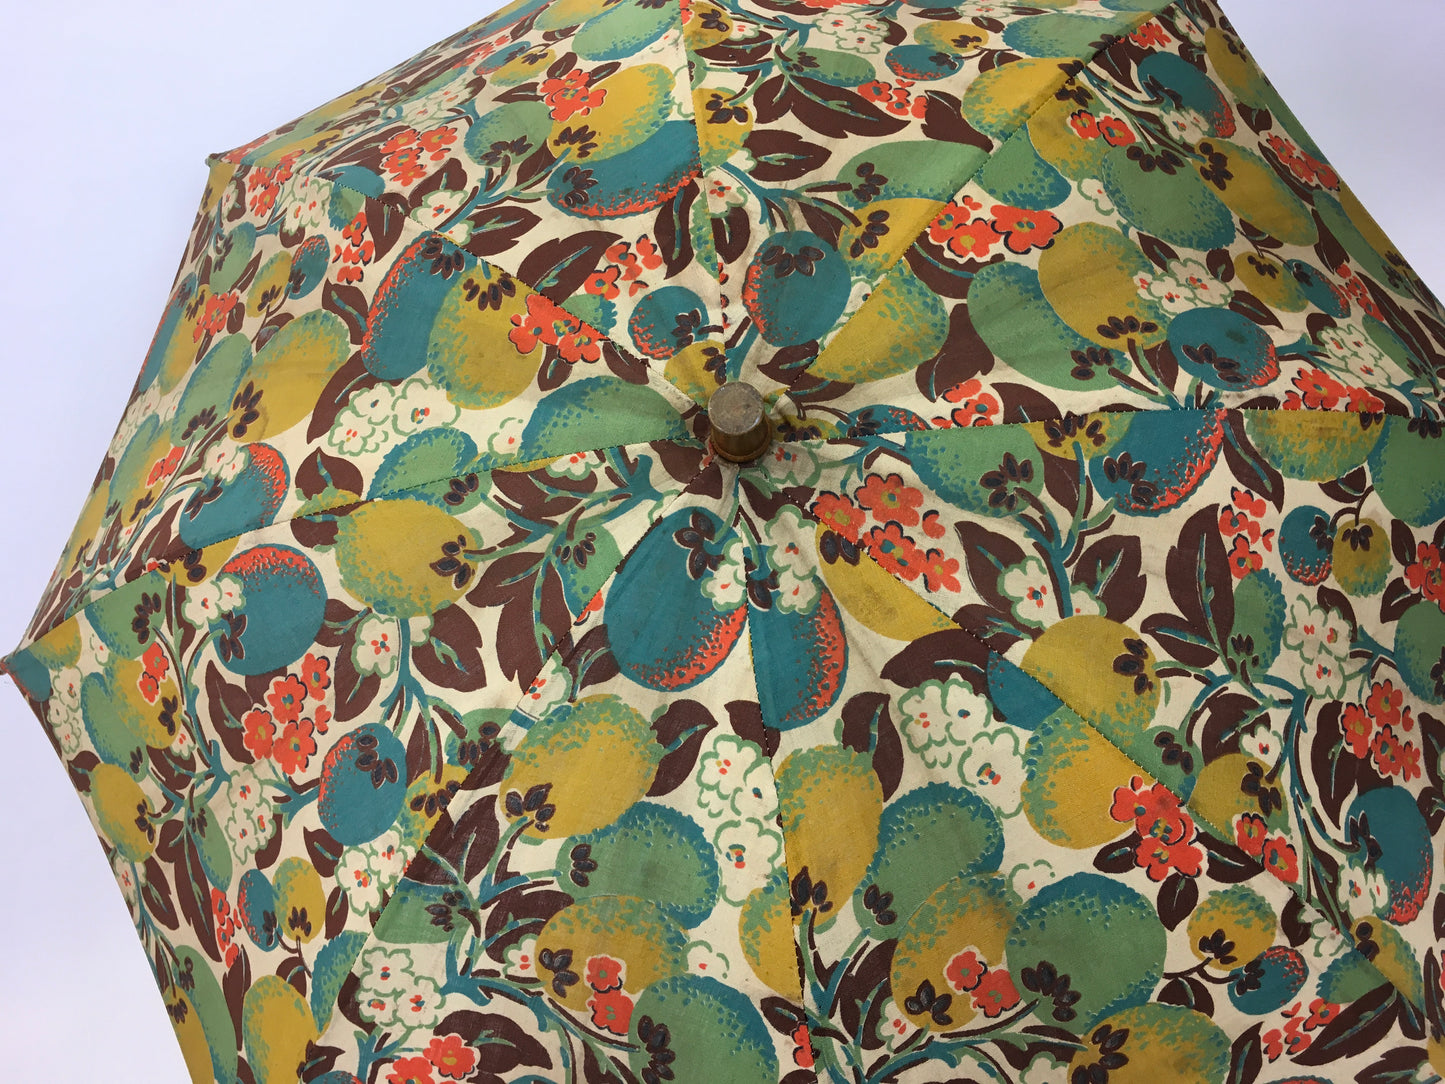 Original 1930s Sun Parasol in a Stunning Floral and Fruit Cotton - In Deco Oranges, Greens, Chartreuse and Teal